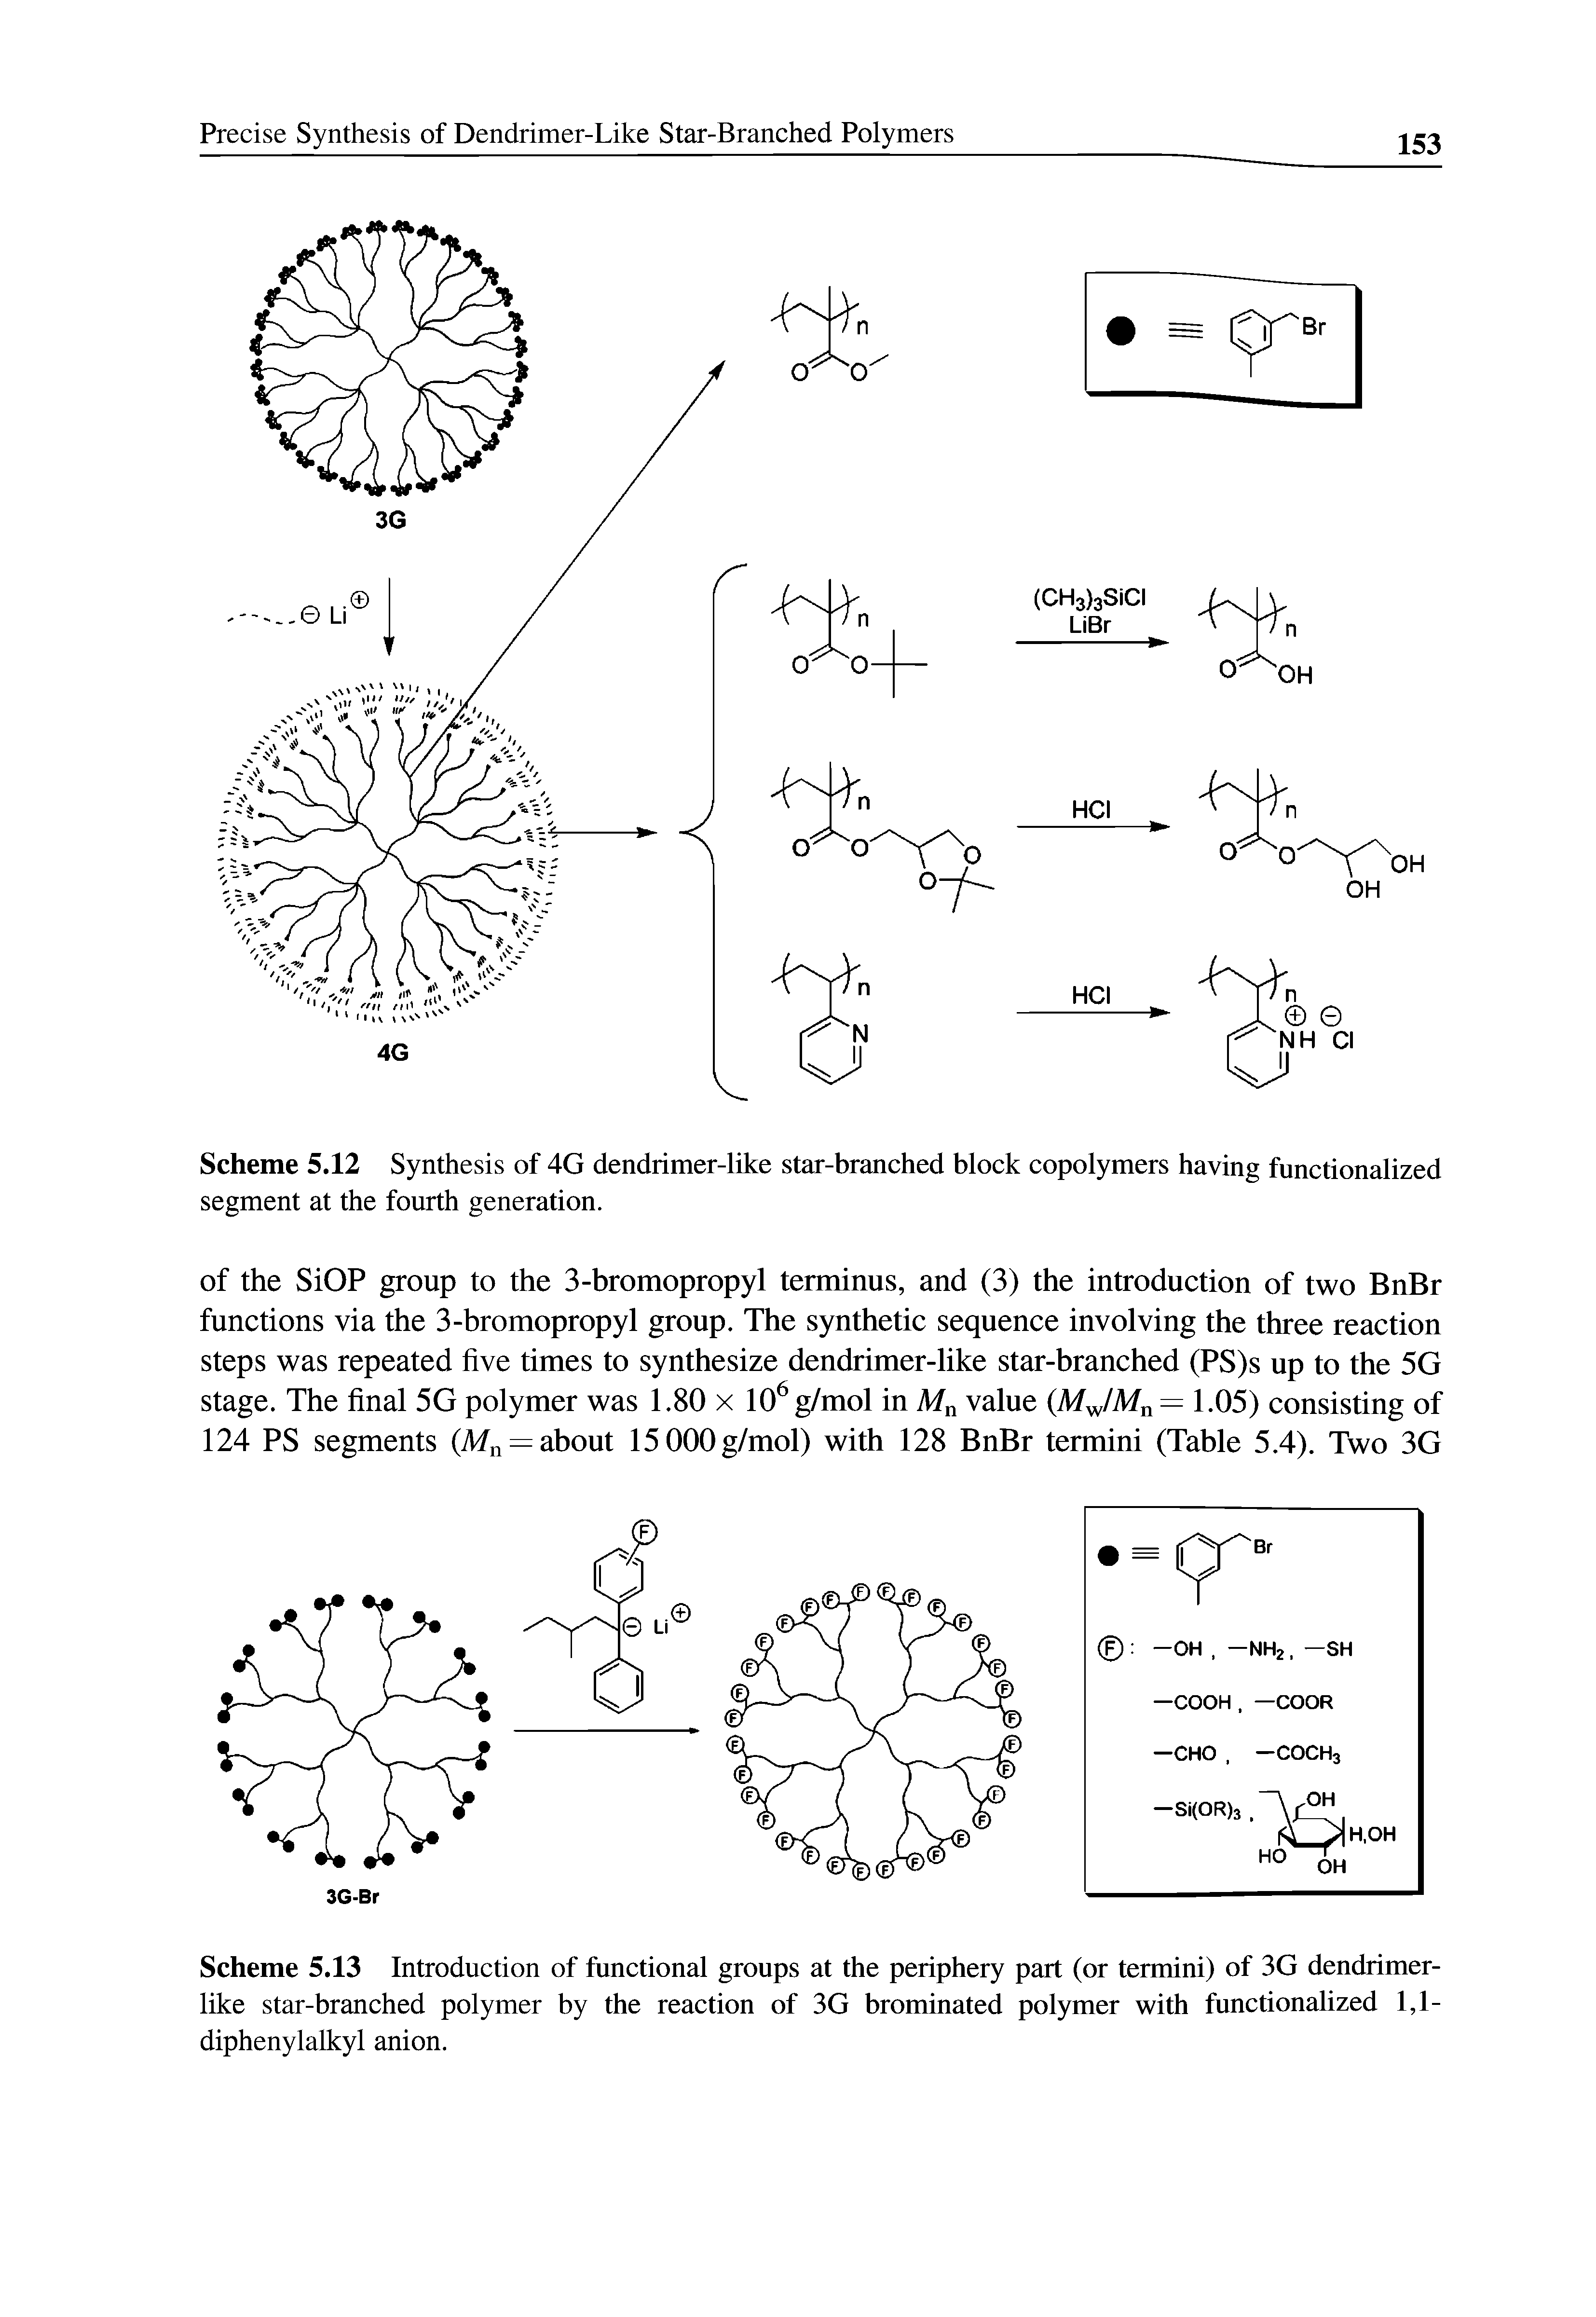 Scheme 5.13 Introduction of functional groups at the periphery part (or termini) of 3G dendrimer-like star-branched polymer by the reaction of 3G brominated polymer with functionalized 1,1-diphenylalkyl anion.